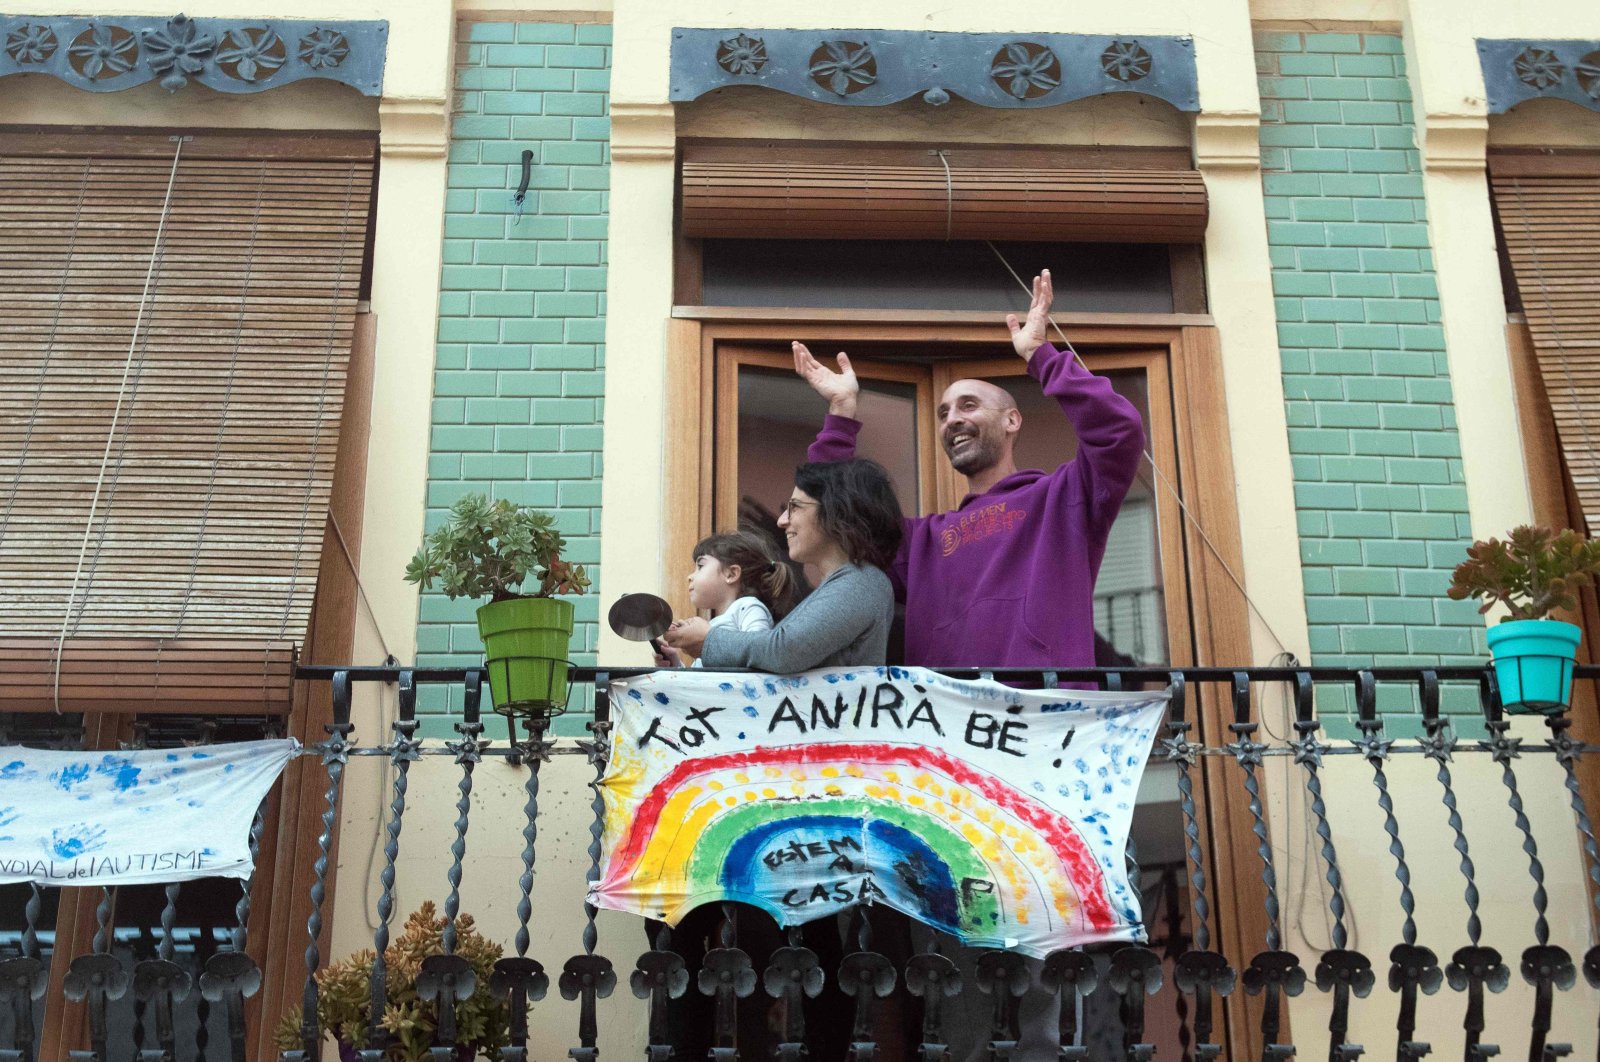 A family applauds from their balcony, adorned with a banner reading "Everything will be ok," in El Cabanal, Valencia, April 9, 2020. (AFP Photo)